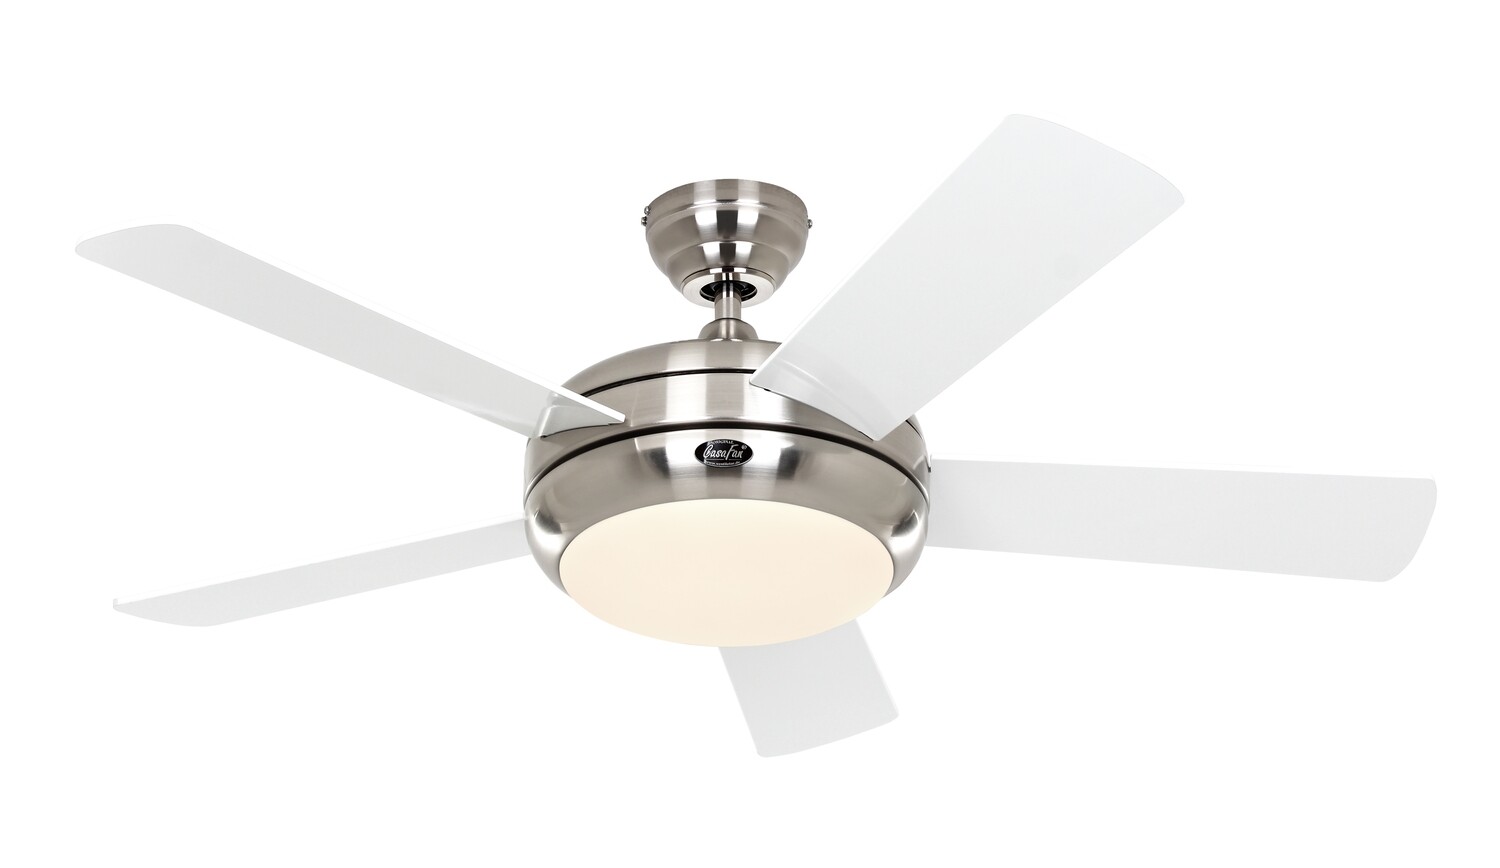 Titanium 105 BN-WE/LG ceiling fan by CASAFAN Ø105 light integrated and remote control included